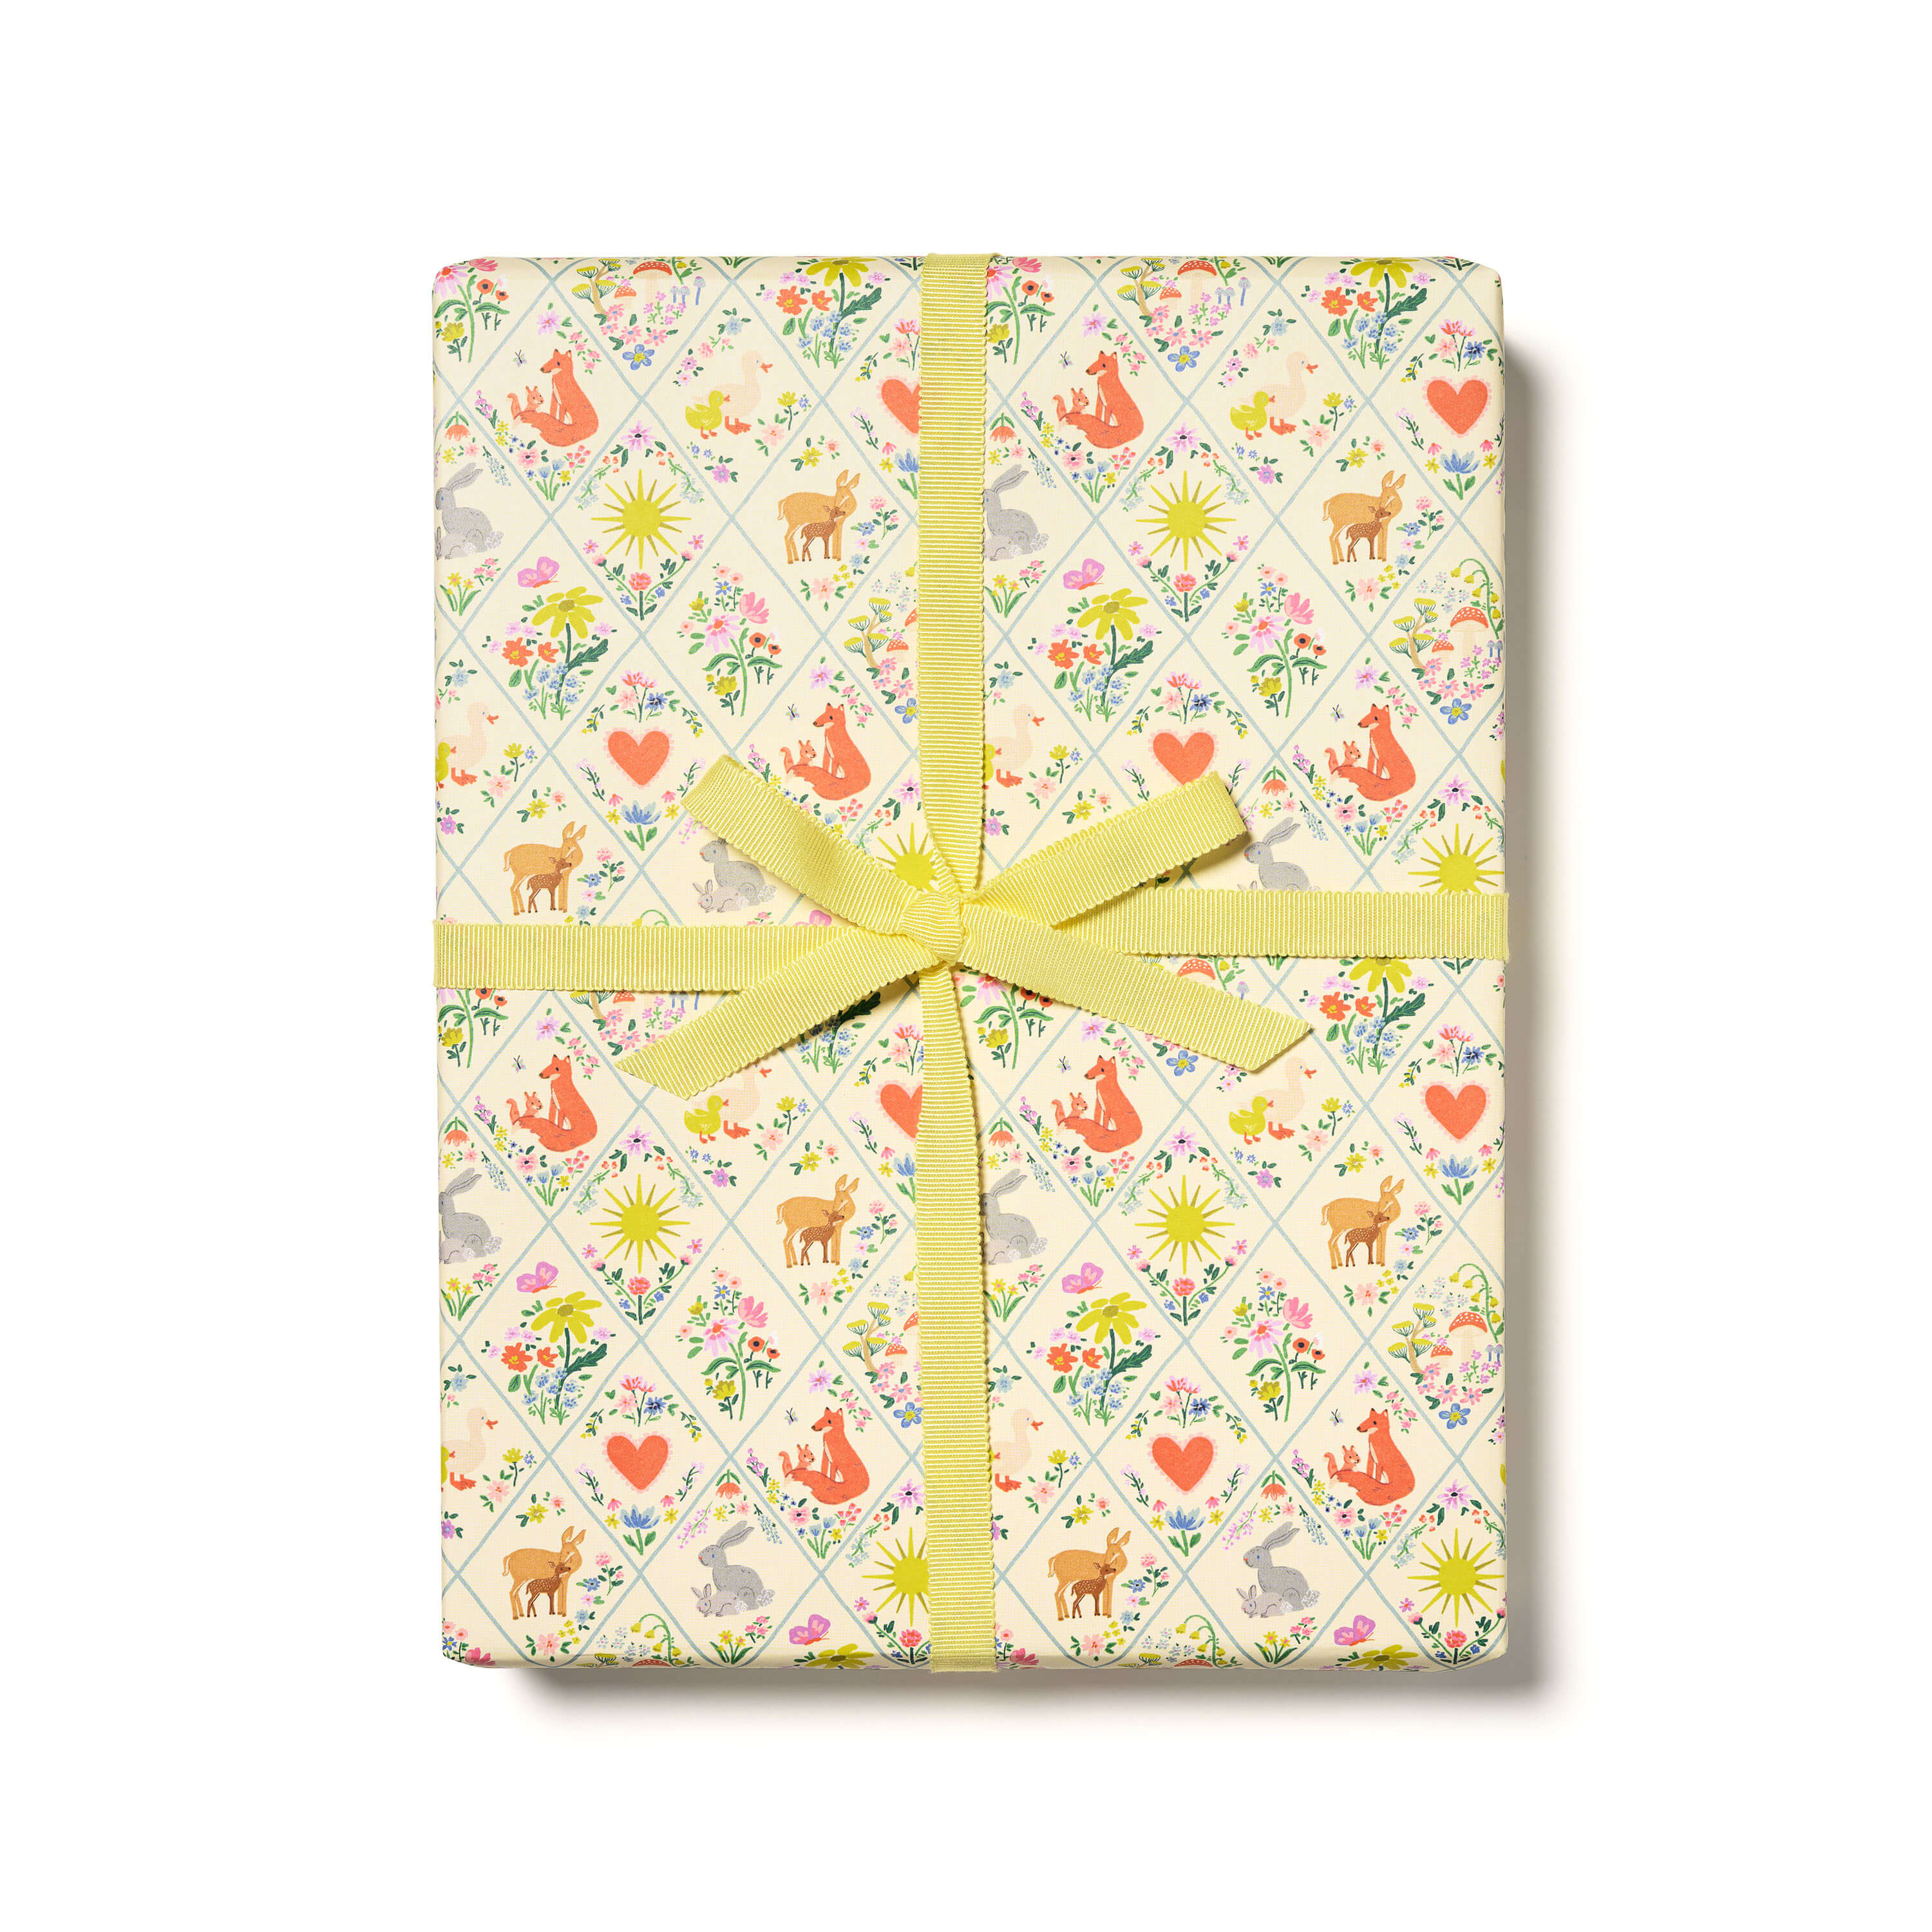 Woodland Critters wrapping paper